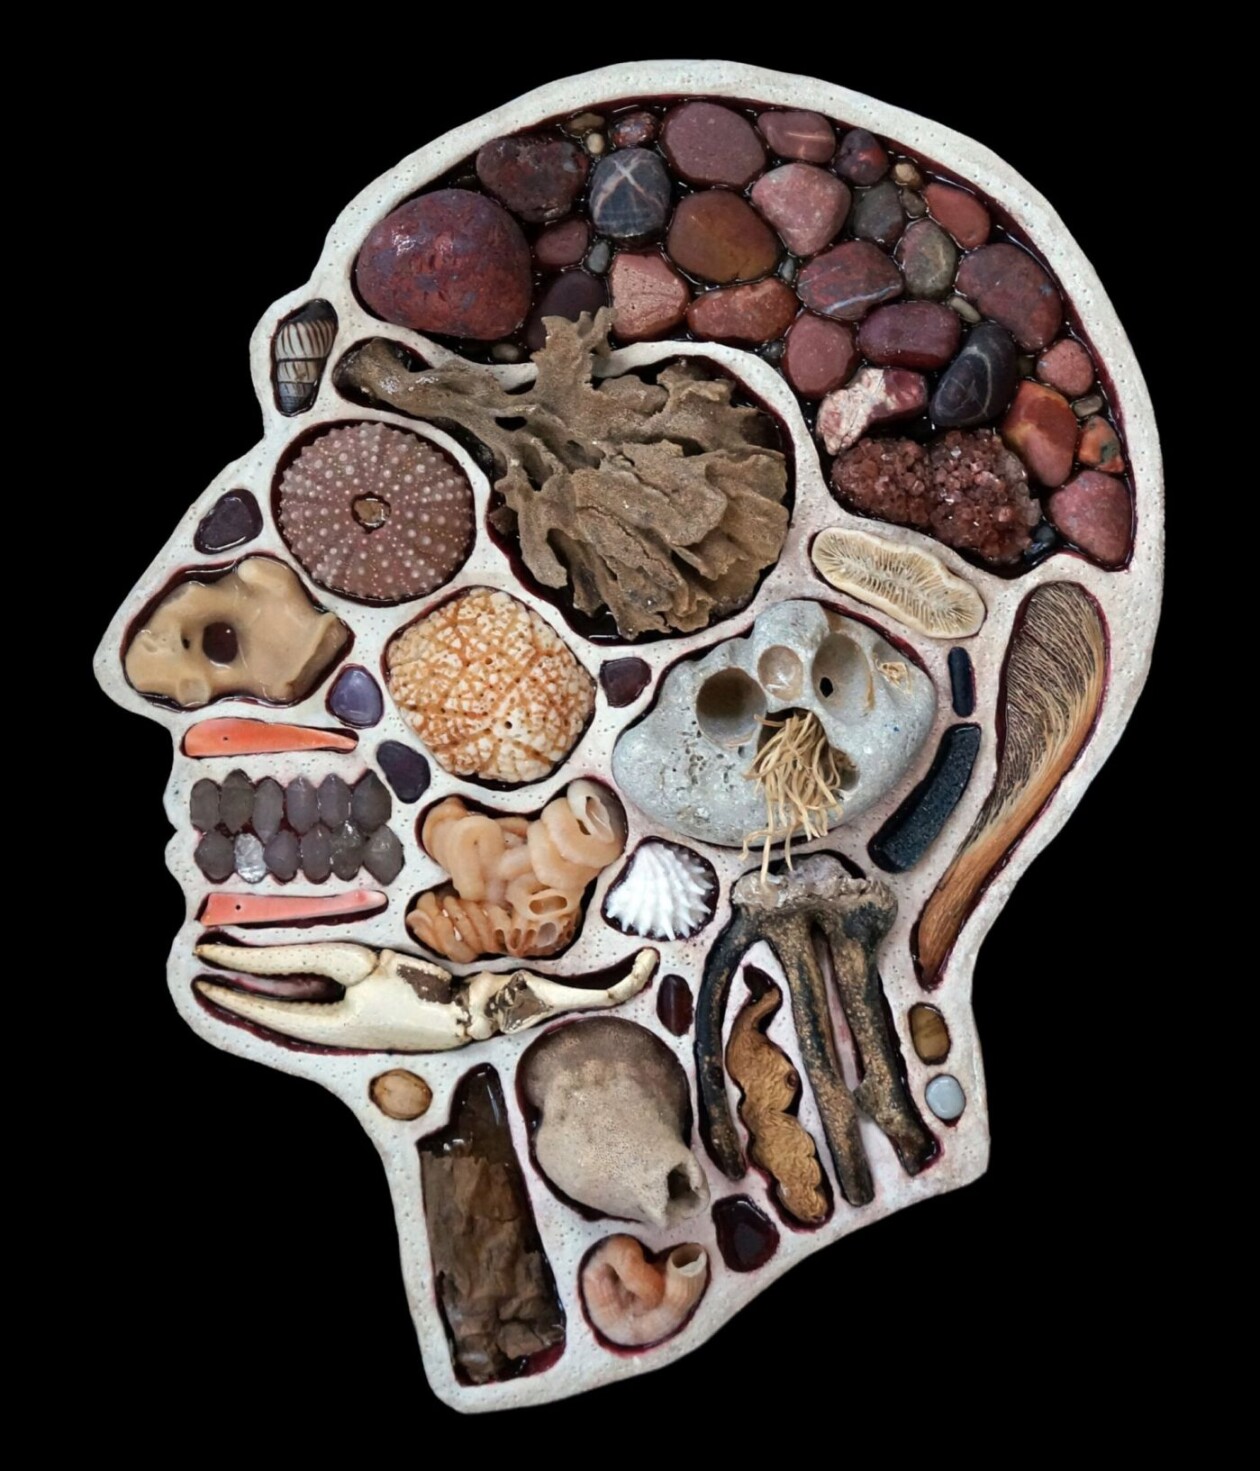 Assemblage Sculptures Of Anatomical Human Head Cross Sections By Edwige Massart And Xavier Wynn (15)